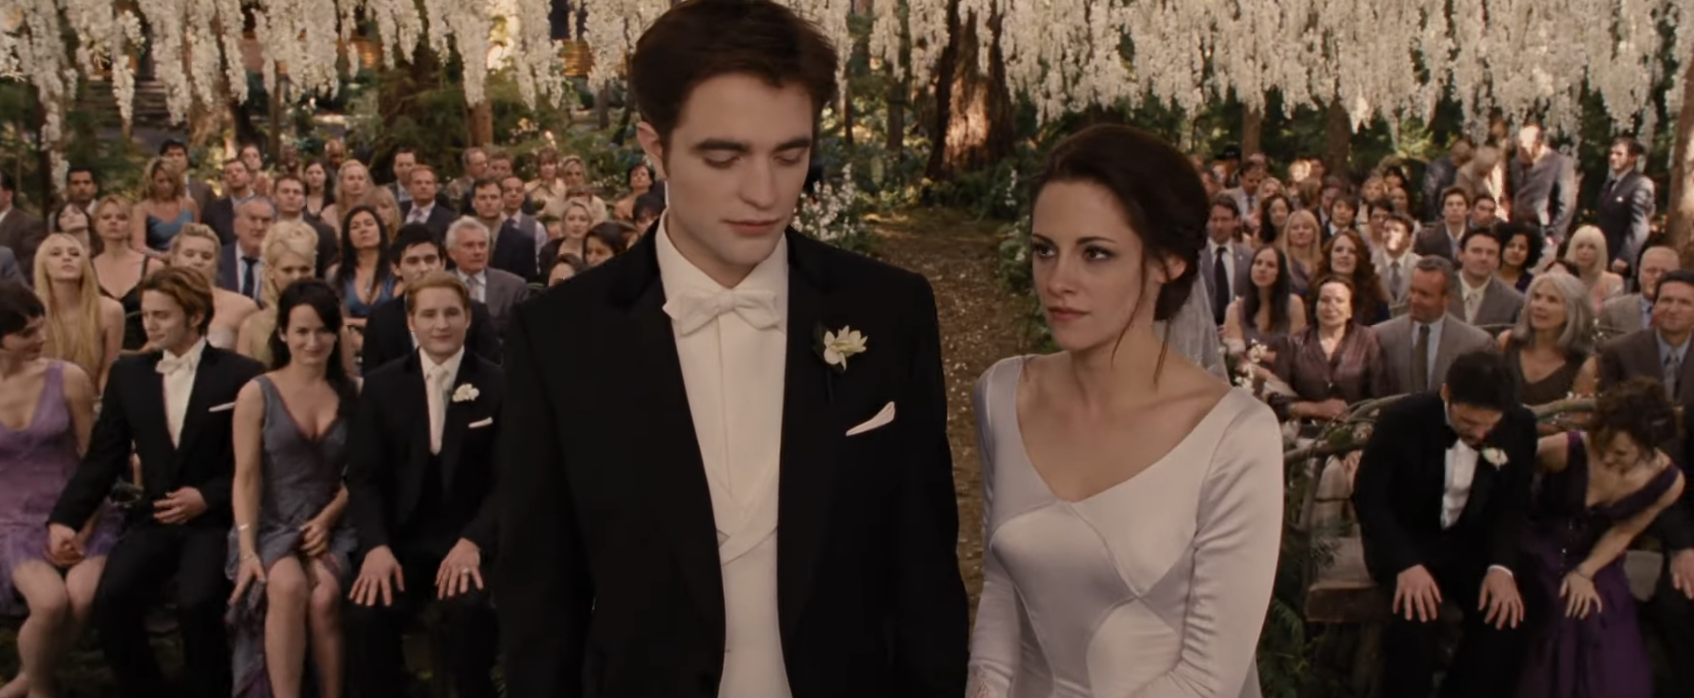 Edward and Bella in formal wedding attire at their outdoor wedding ceremony with guests in the background